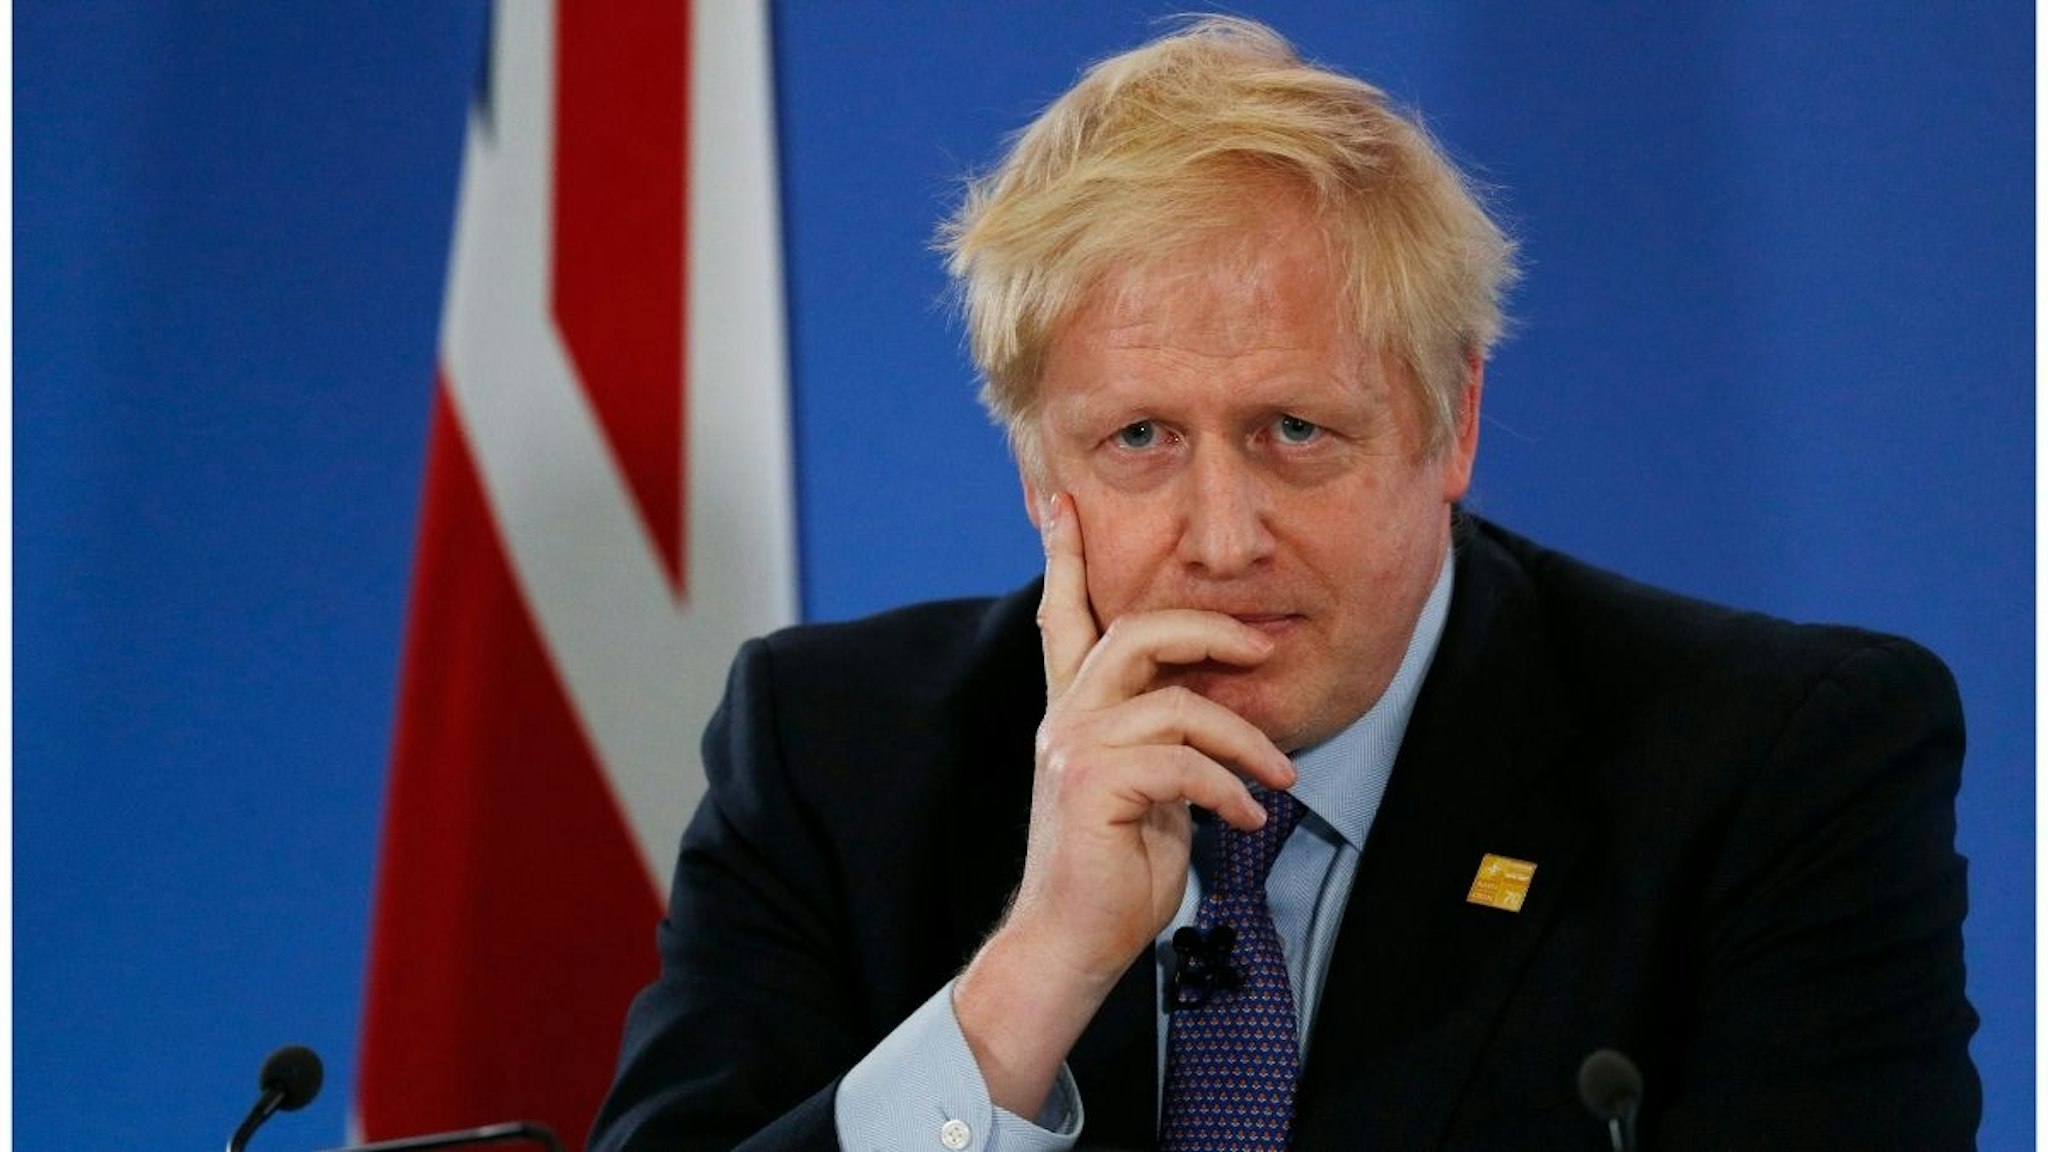 Britain's Prime Minister Boris Johnson gives a press conference at the NATO summit at the Grove hotel on December 4, 2019 in Watford, England.